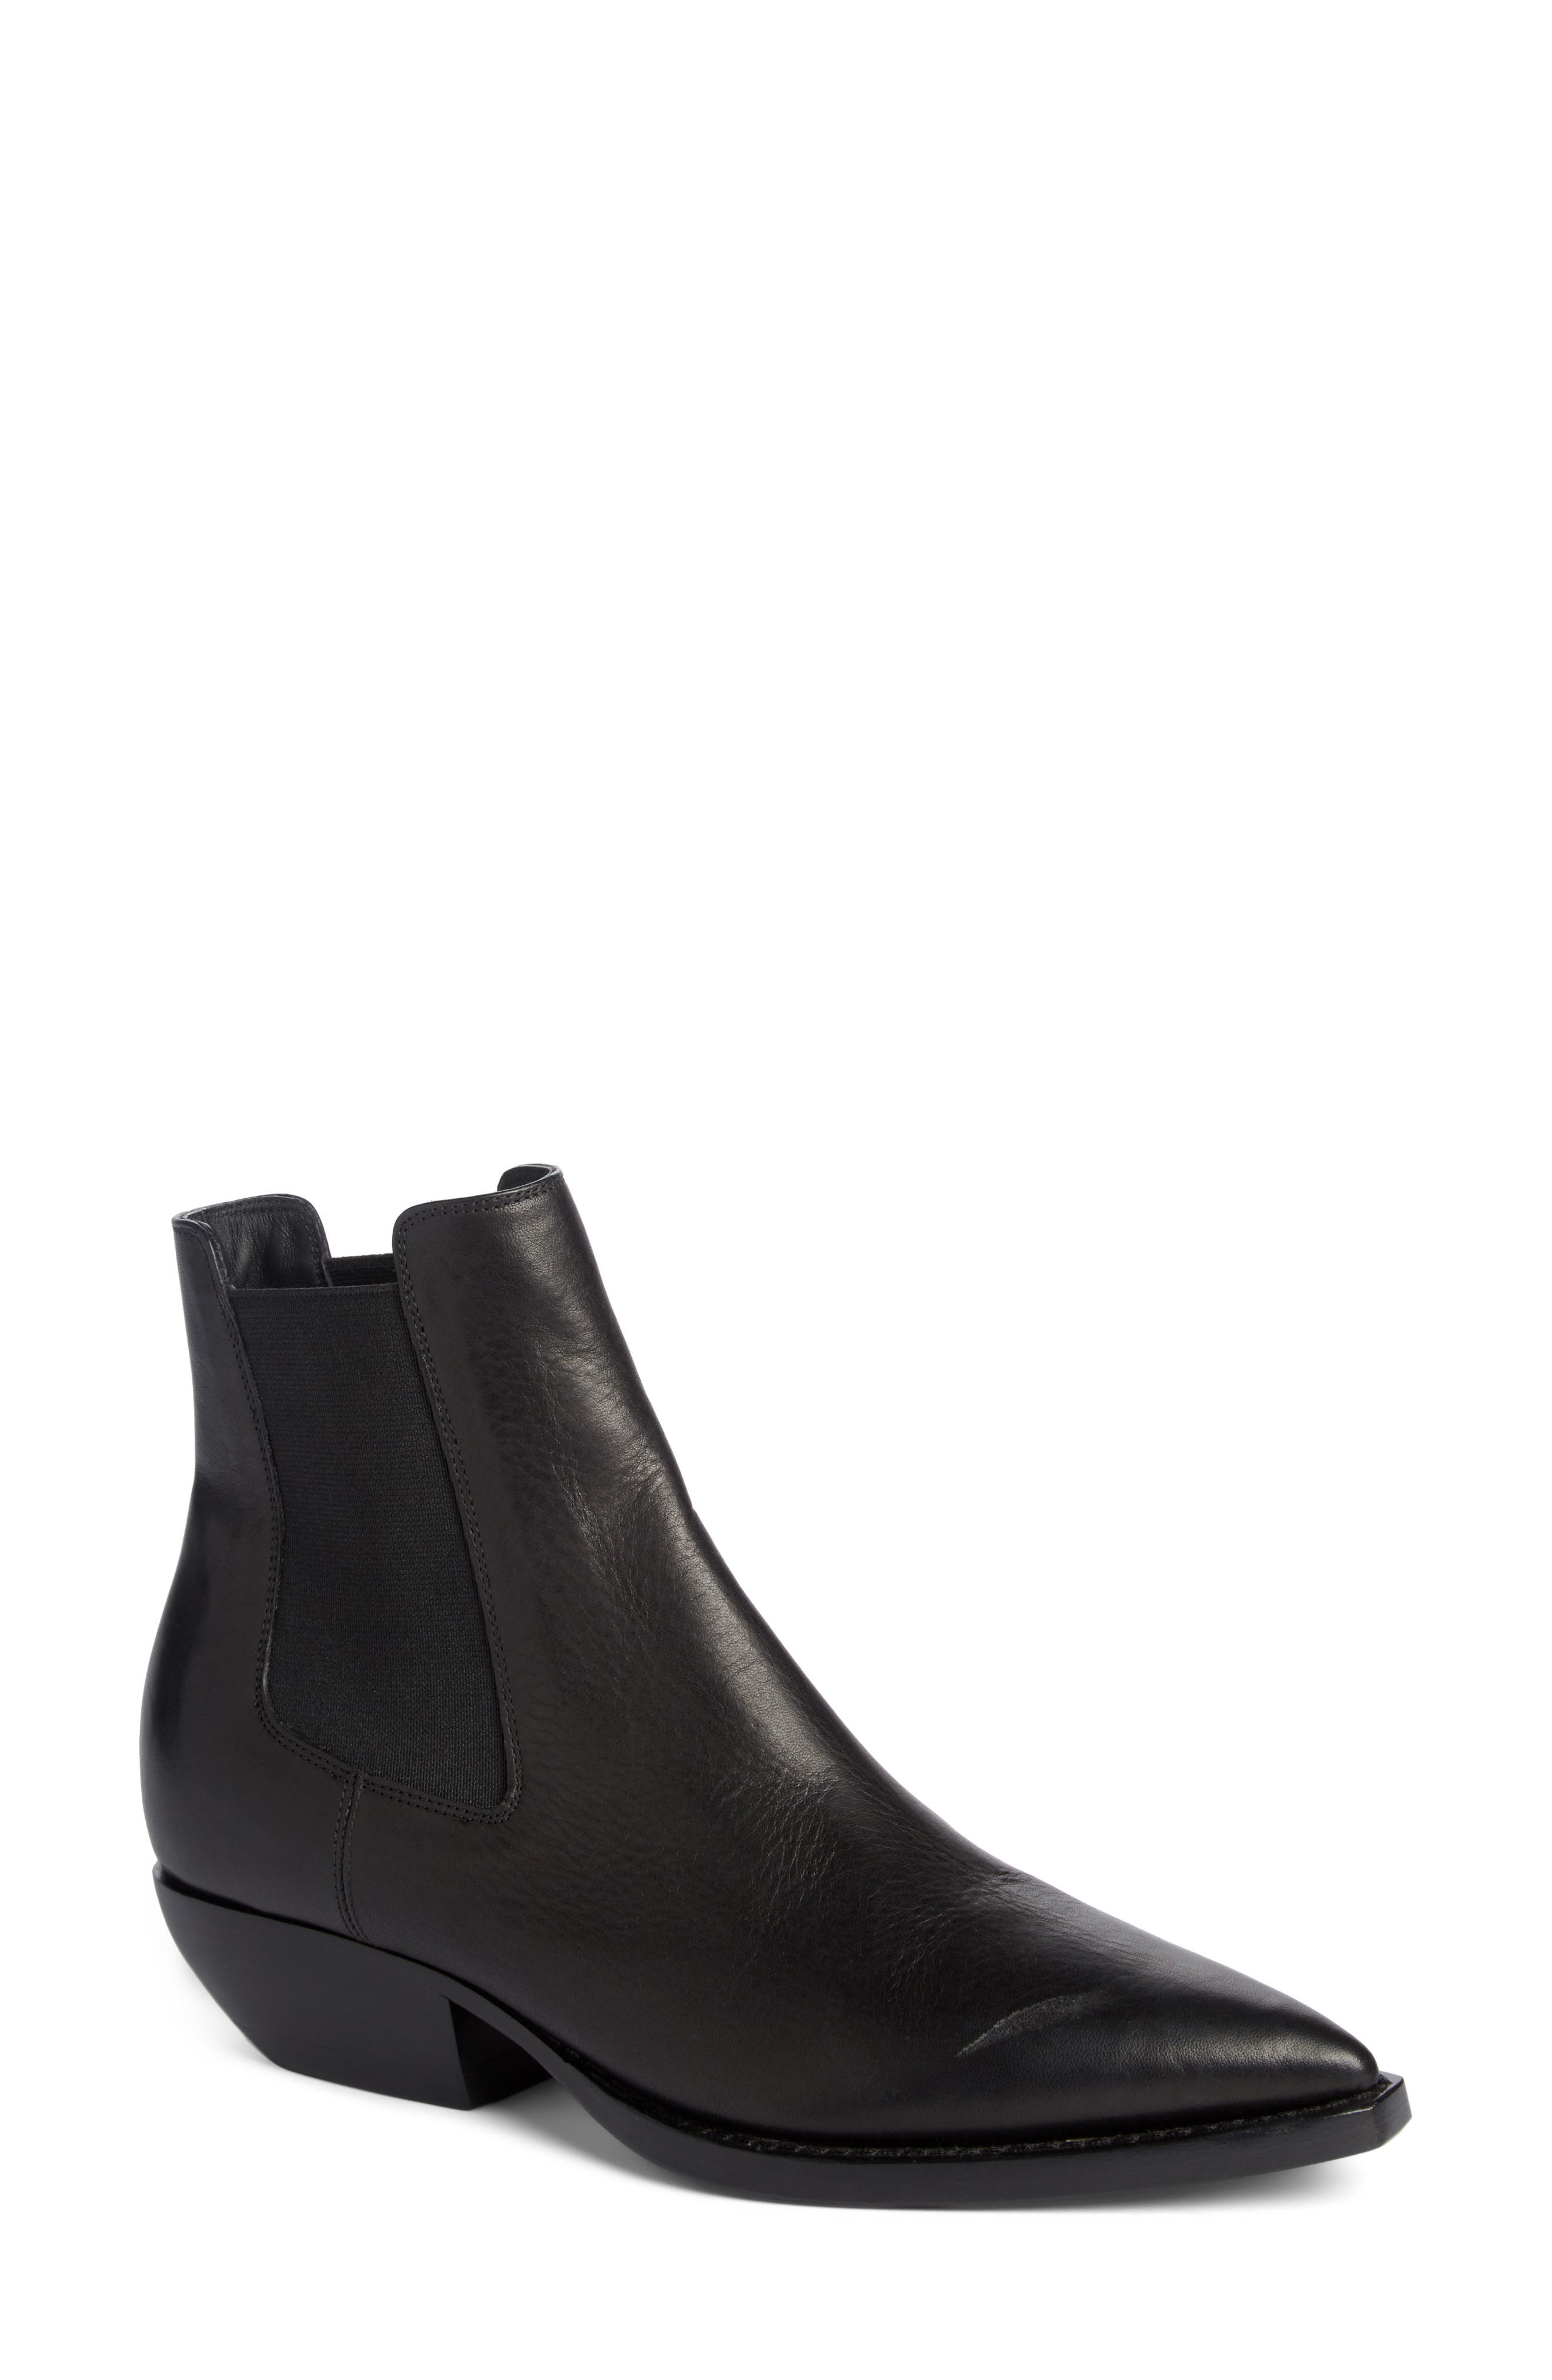 ysl theo boots